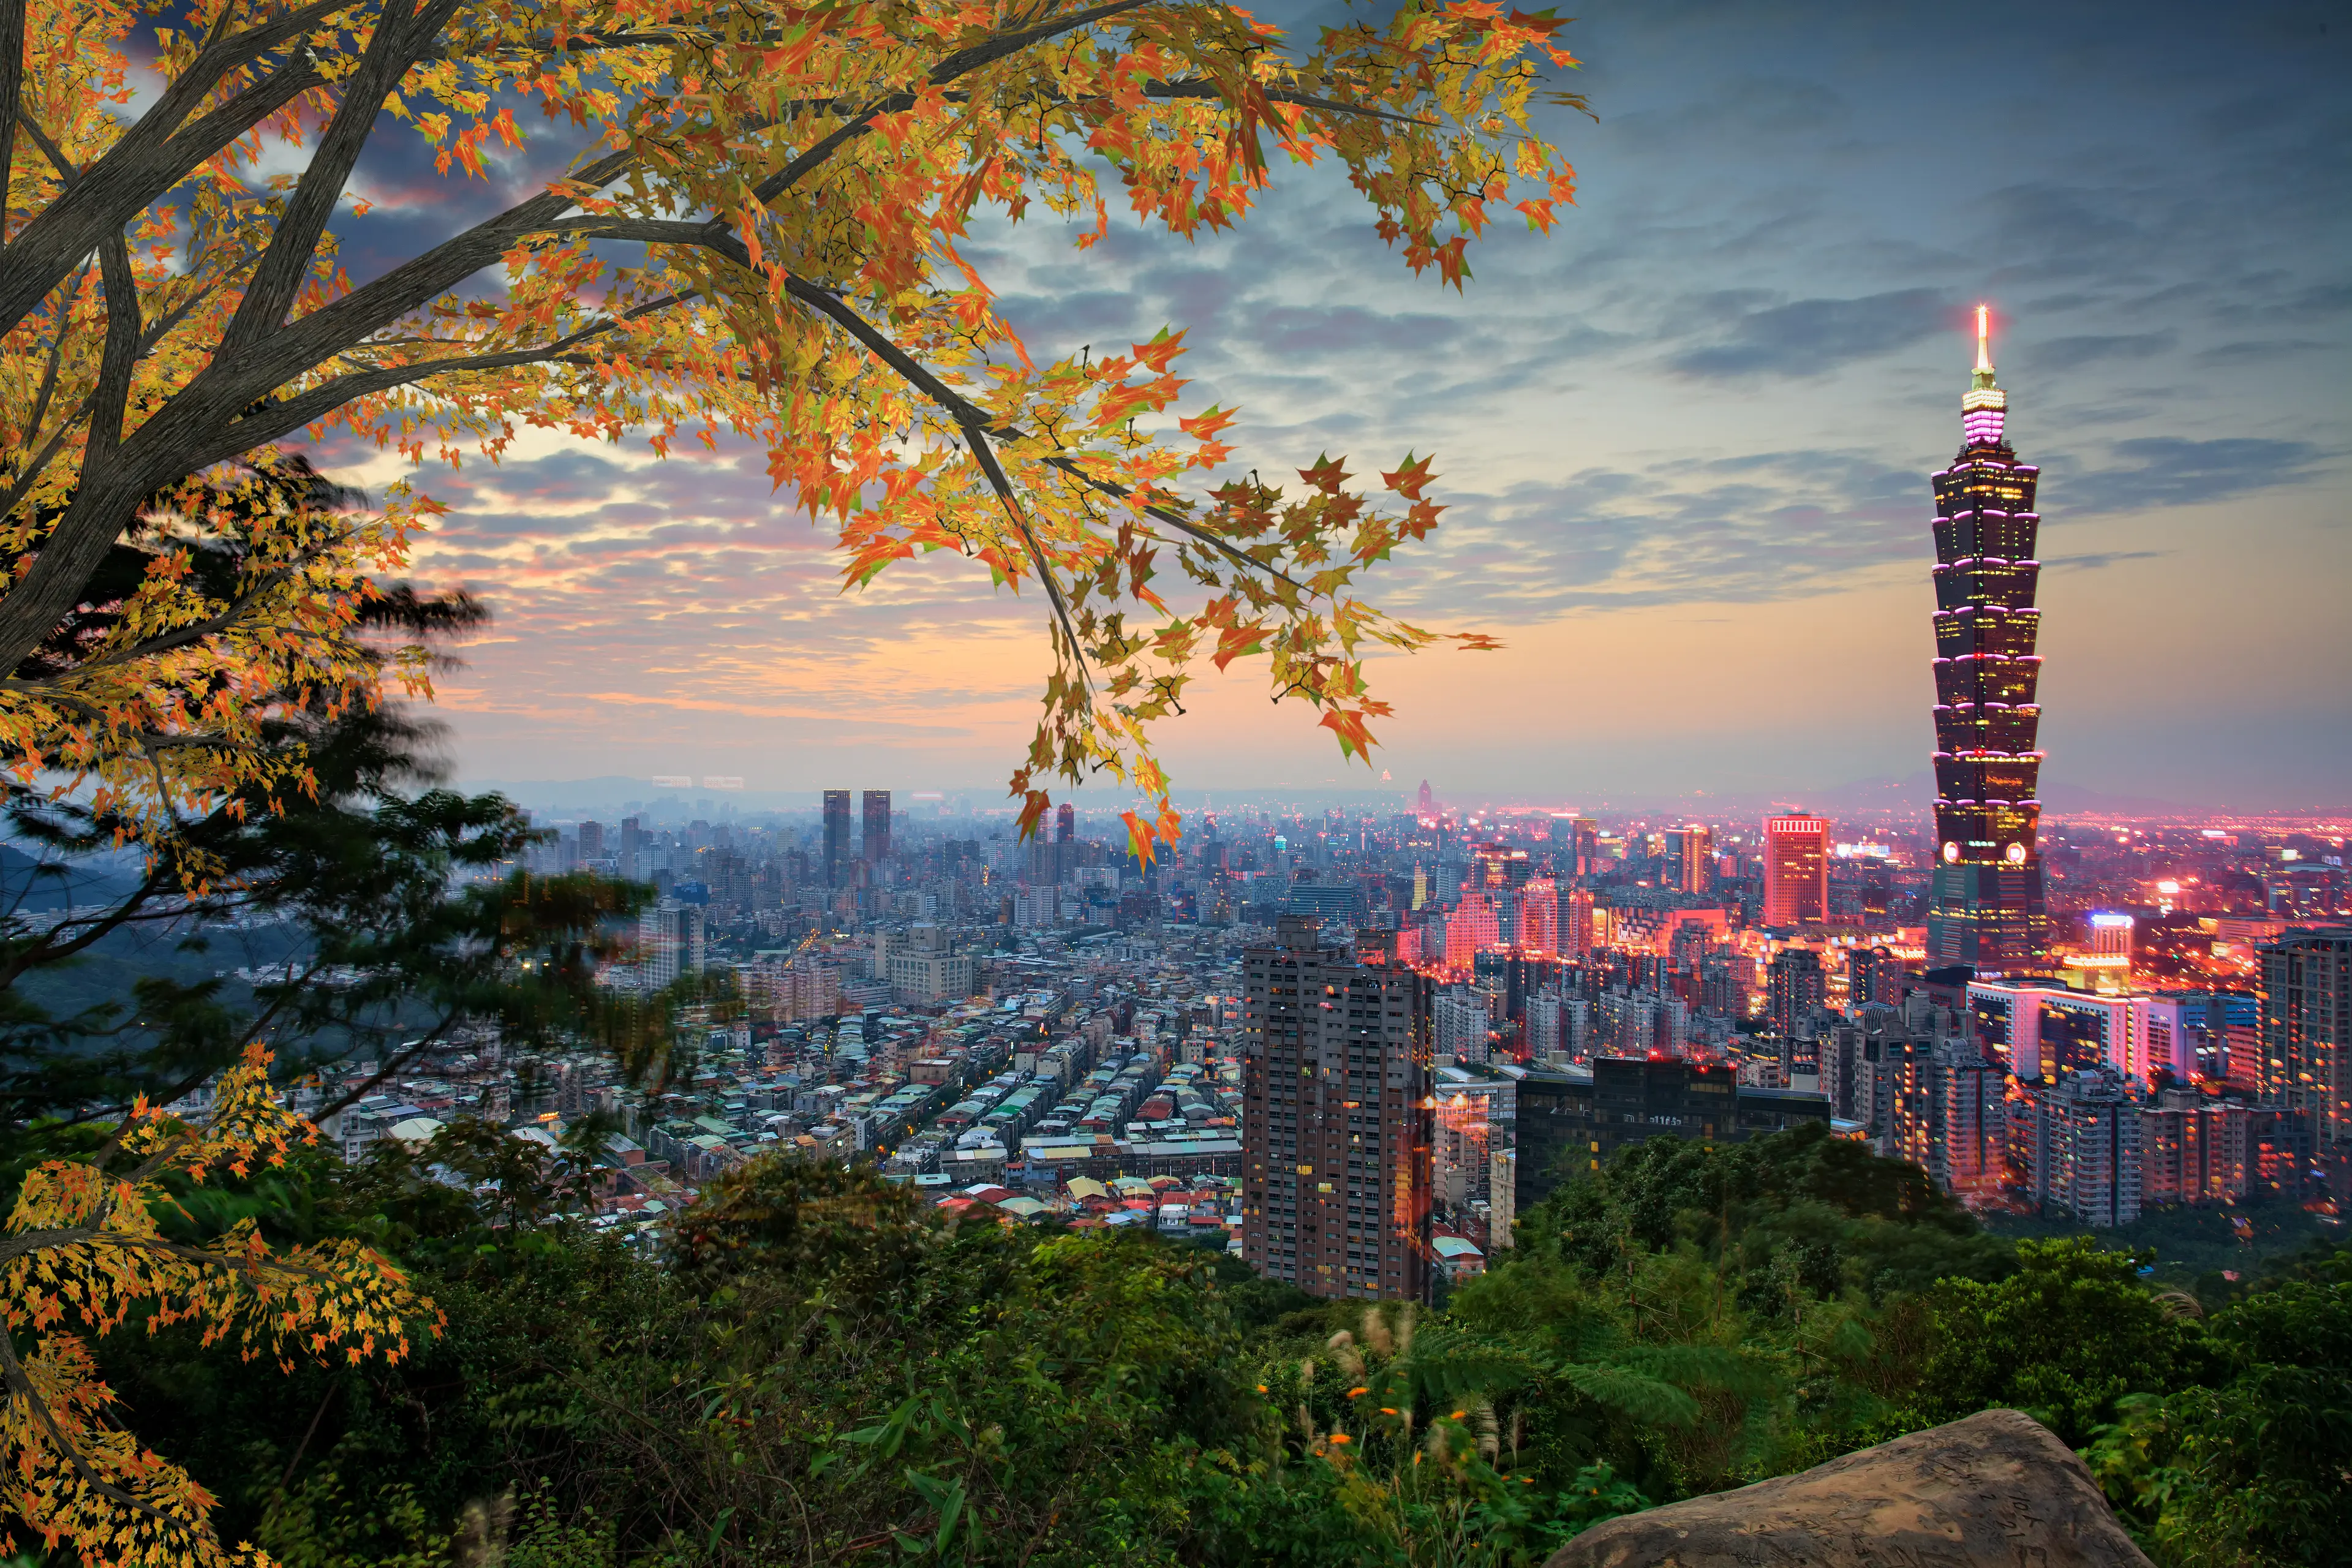 2-Day Unconventional Couples Getaway: Taipei Sightseeing and Outdoors